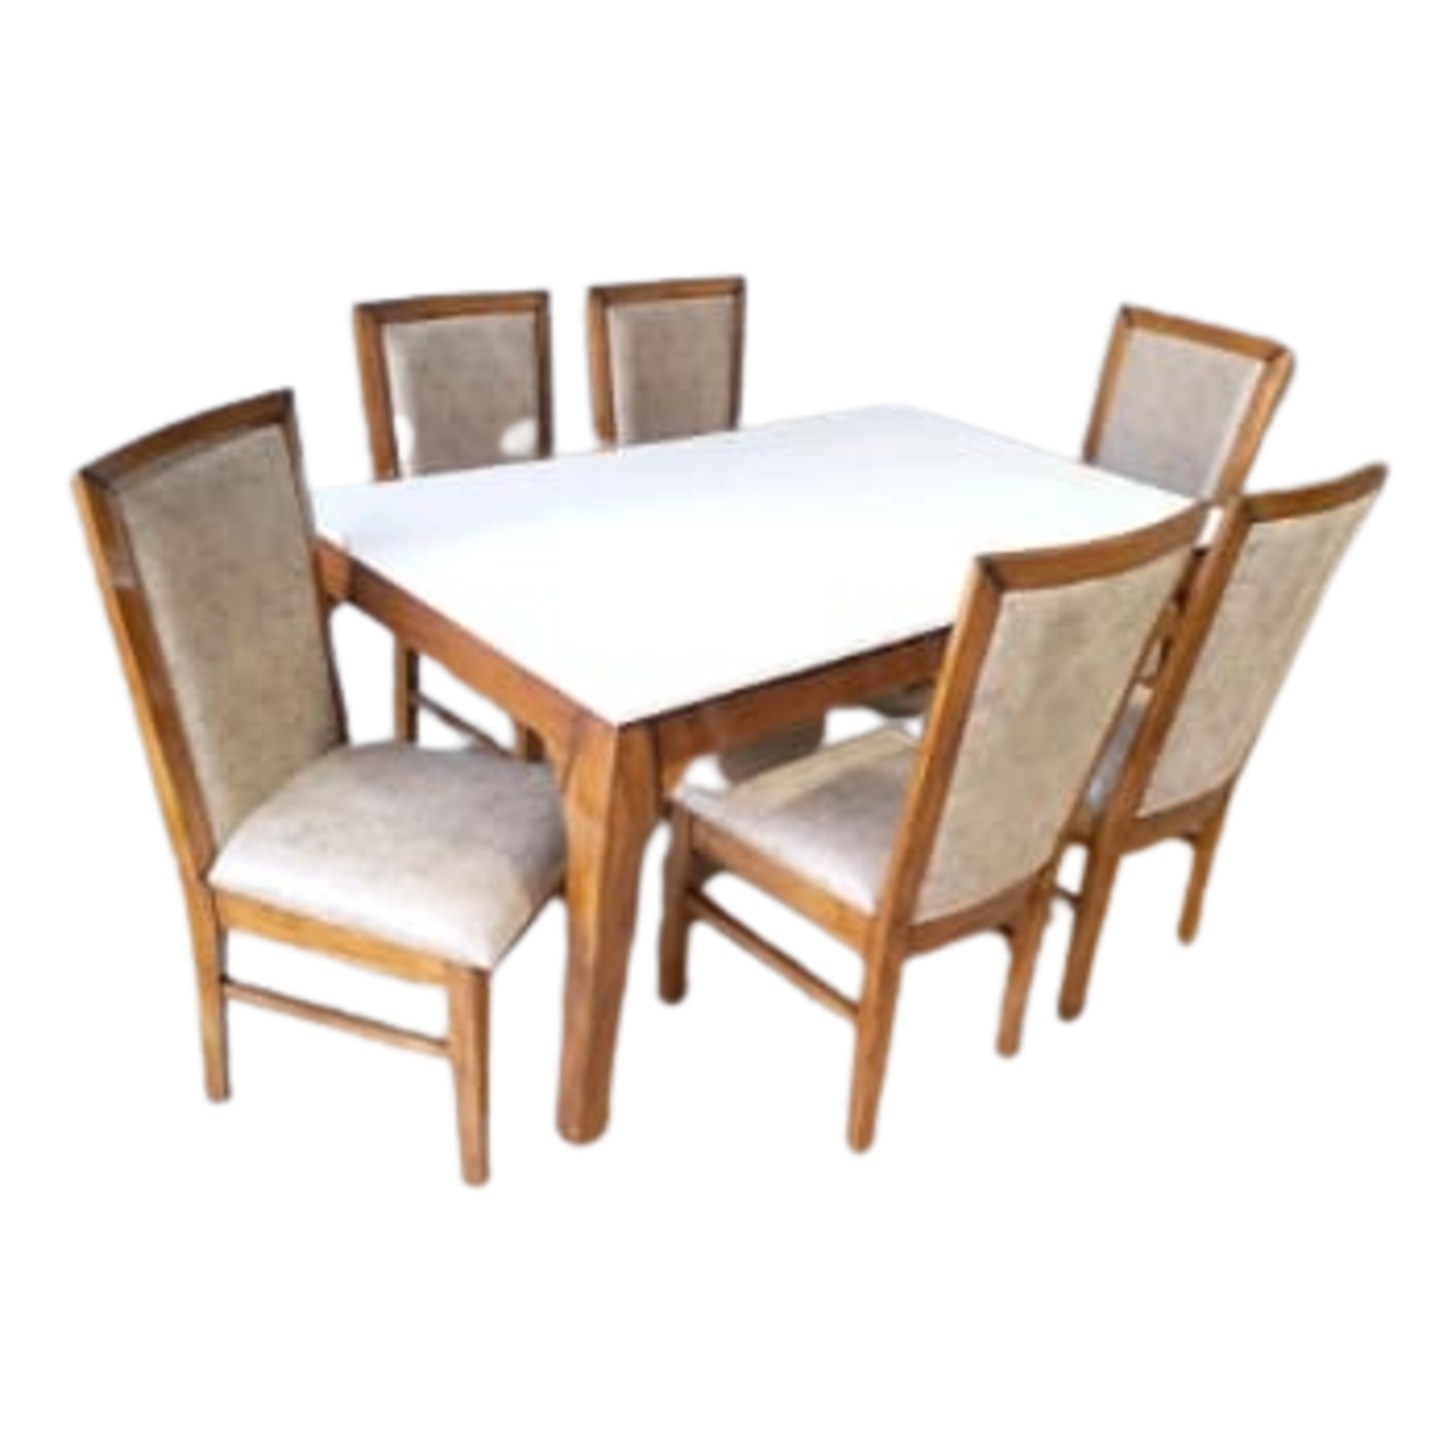 DW Marble Top H-017 Six Seater Dining Table Set in Brown Colour